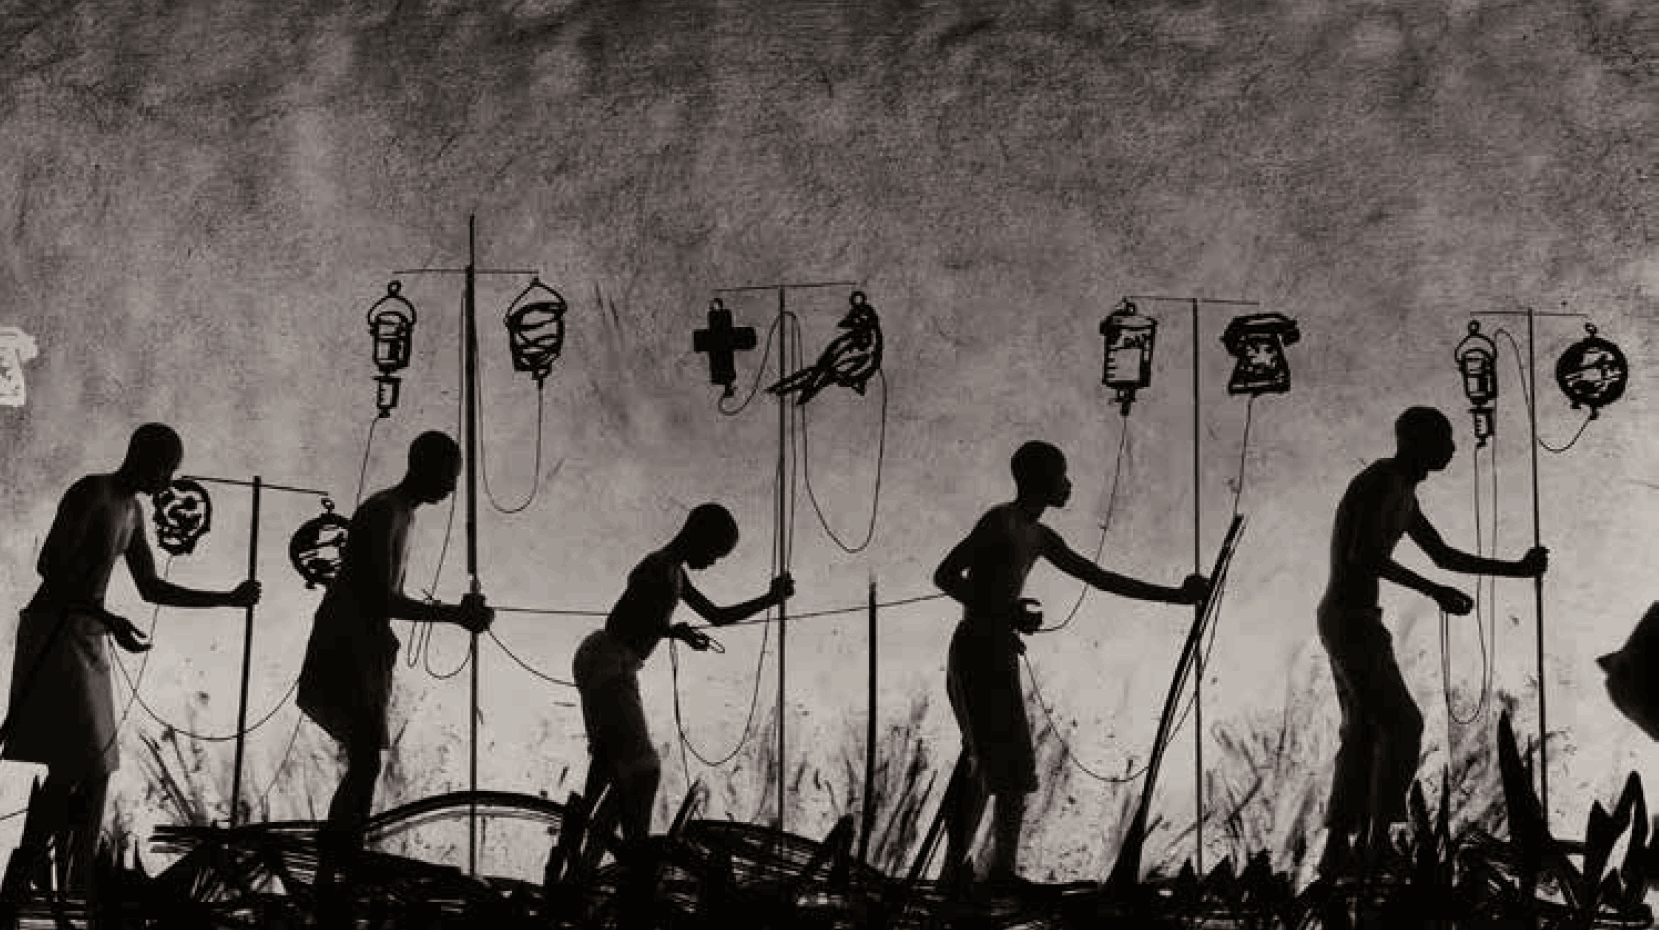 William Kentridge, video still from film made for “More Sweetly Play the Dance”, 2015. (Photo: William Kentridge)